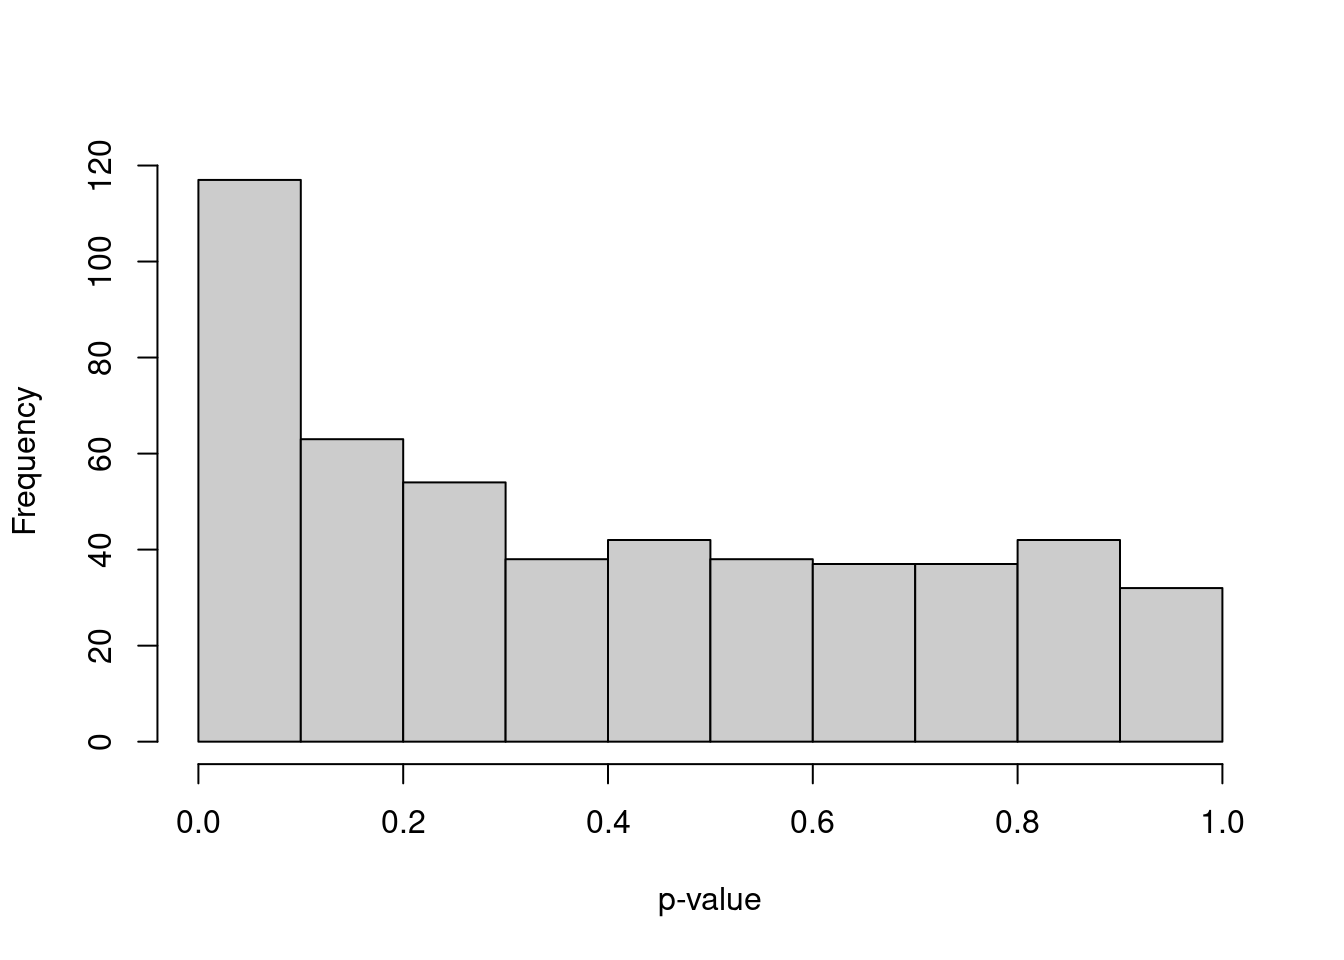 Distribution of $p$-values from a DE analysis between two clusters in a simulation with no true subpopulation structure.